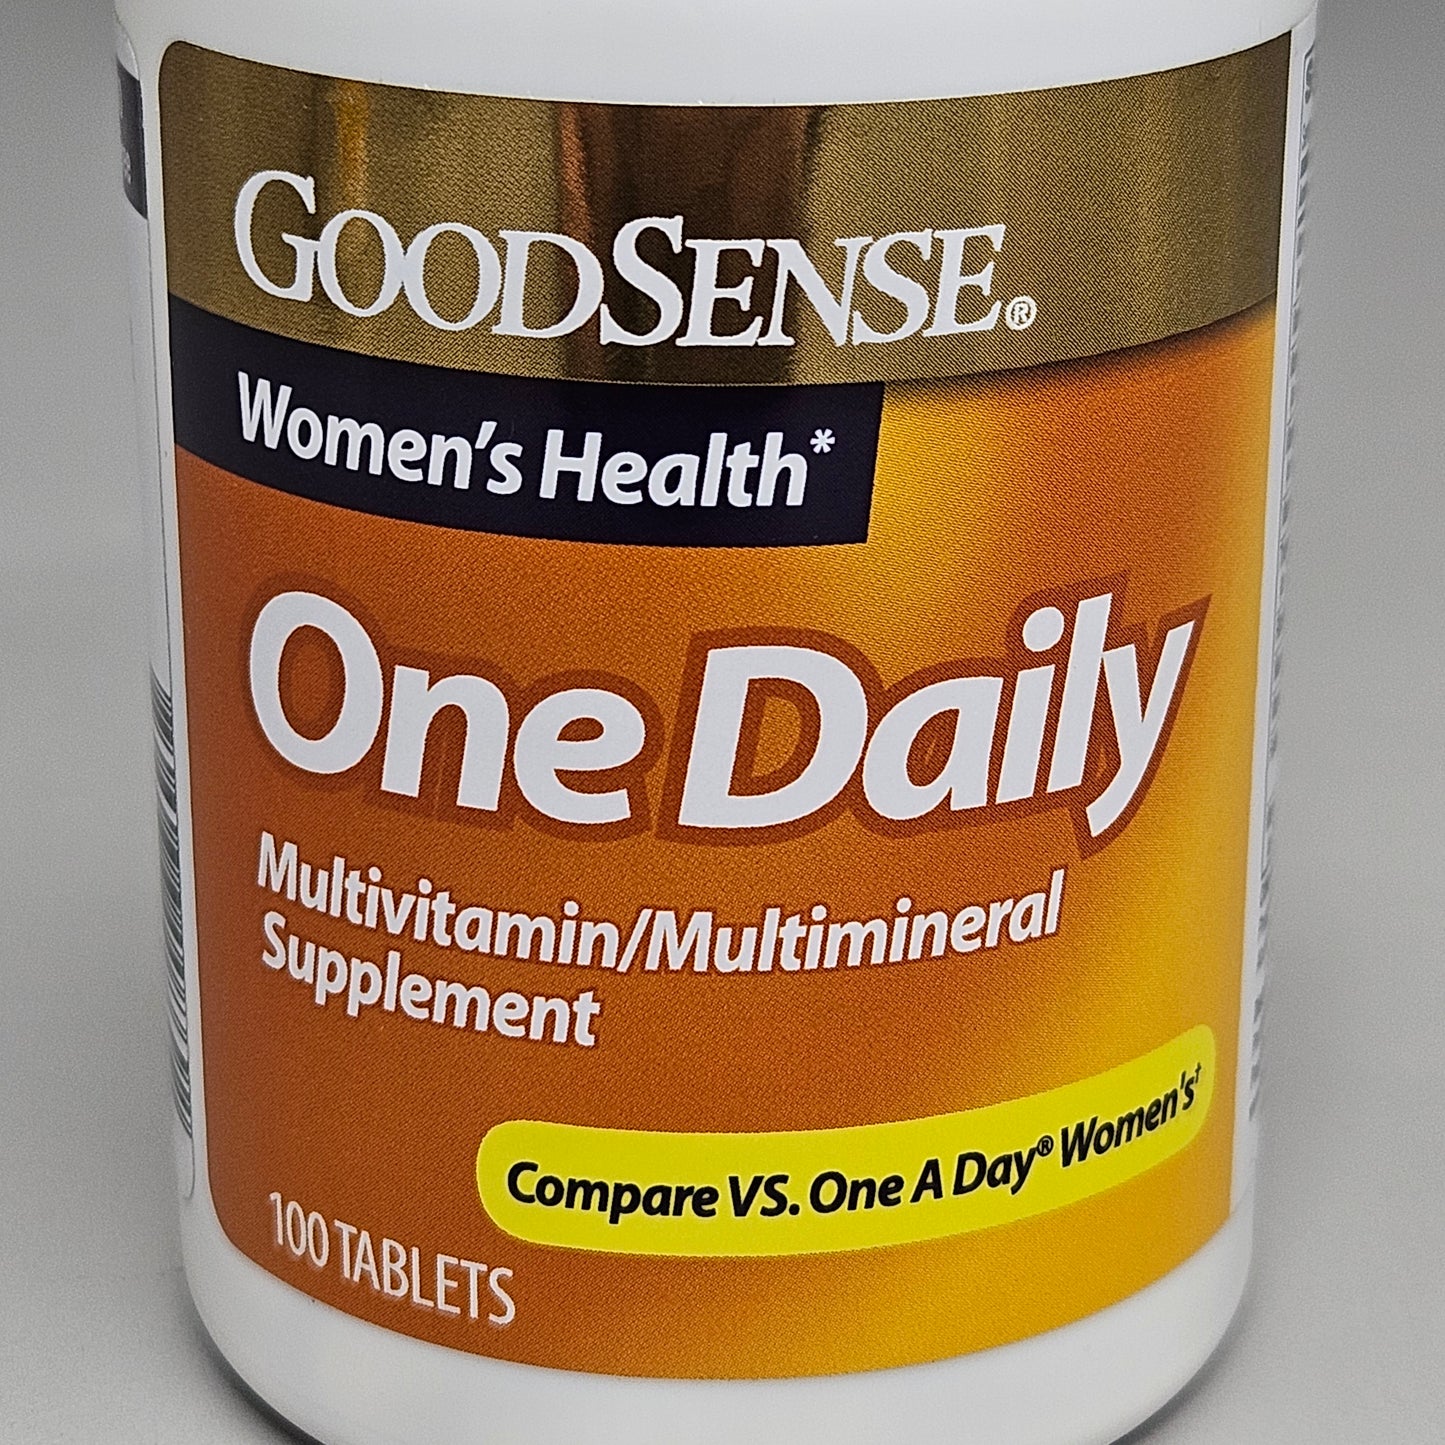 GOODSENSE (3 PACK) Woman's Health One Daily Multivitamin Supplement 100 Tablets 02/25